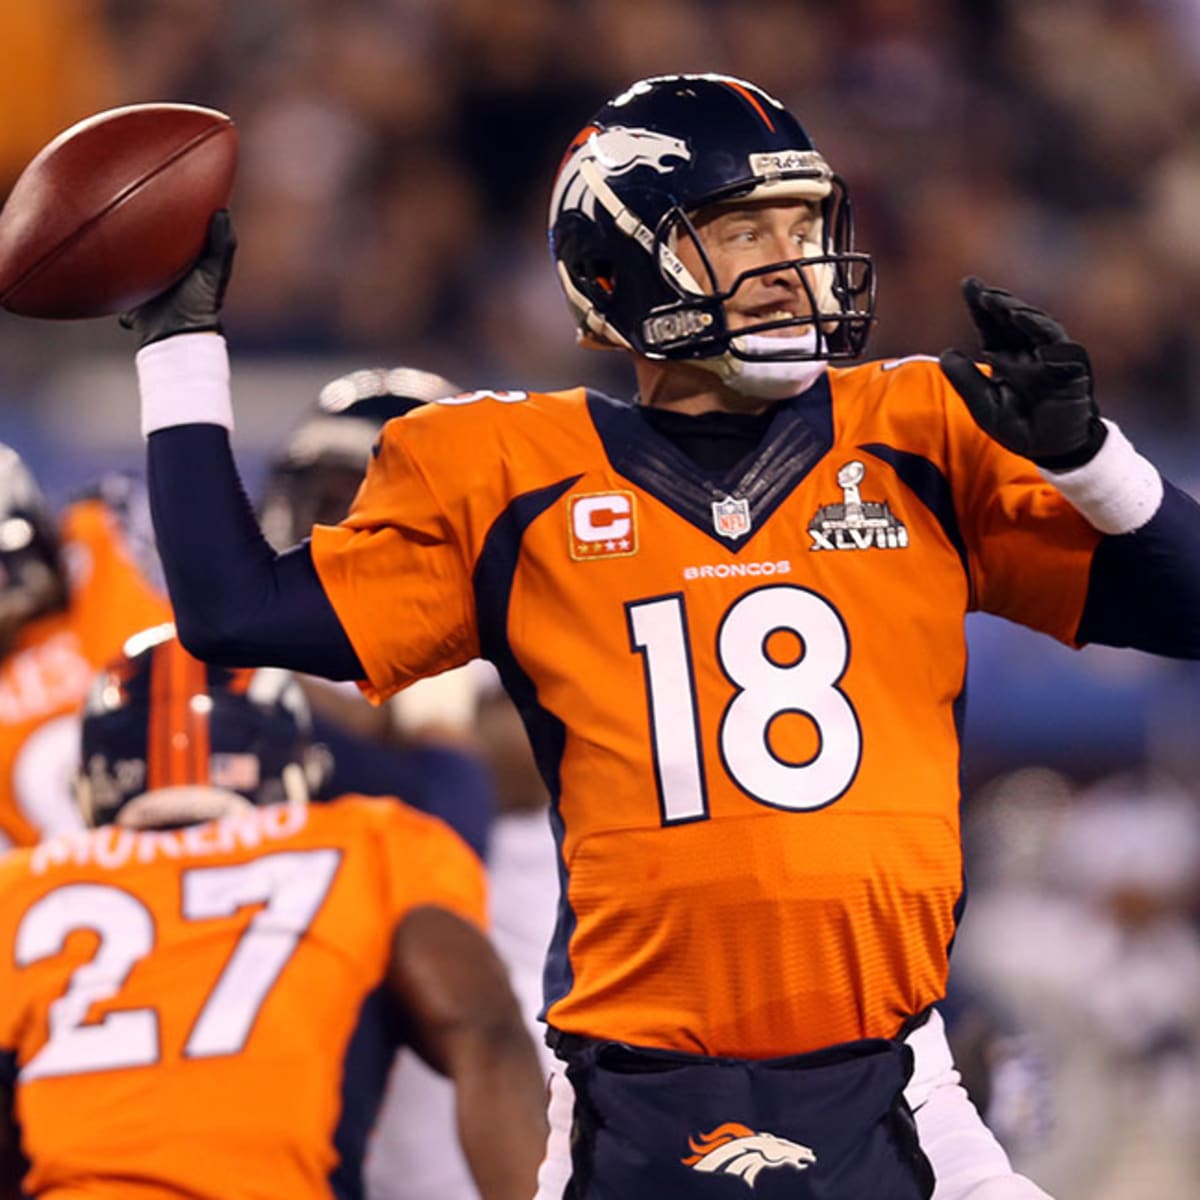 Super Bowl: 5 key plays that led to Broncos' first championship